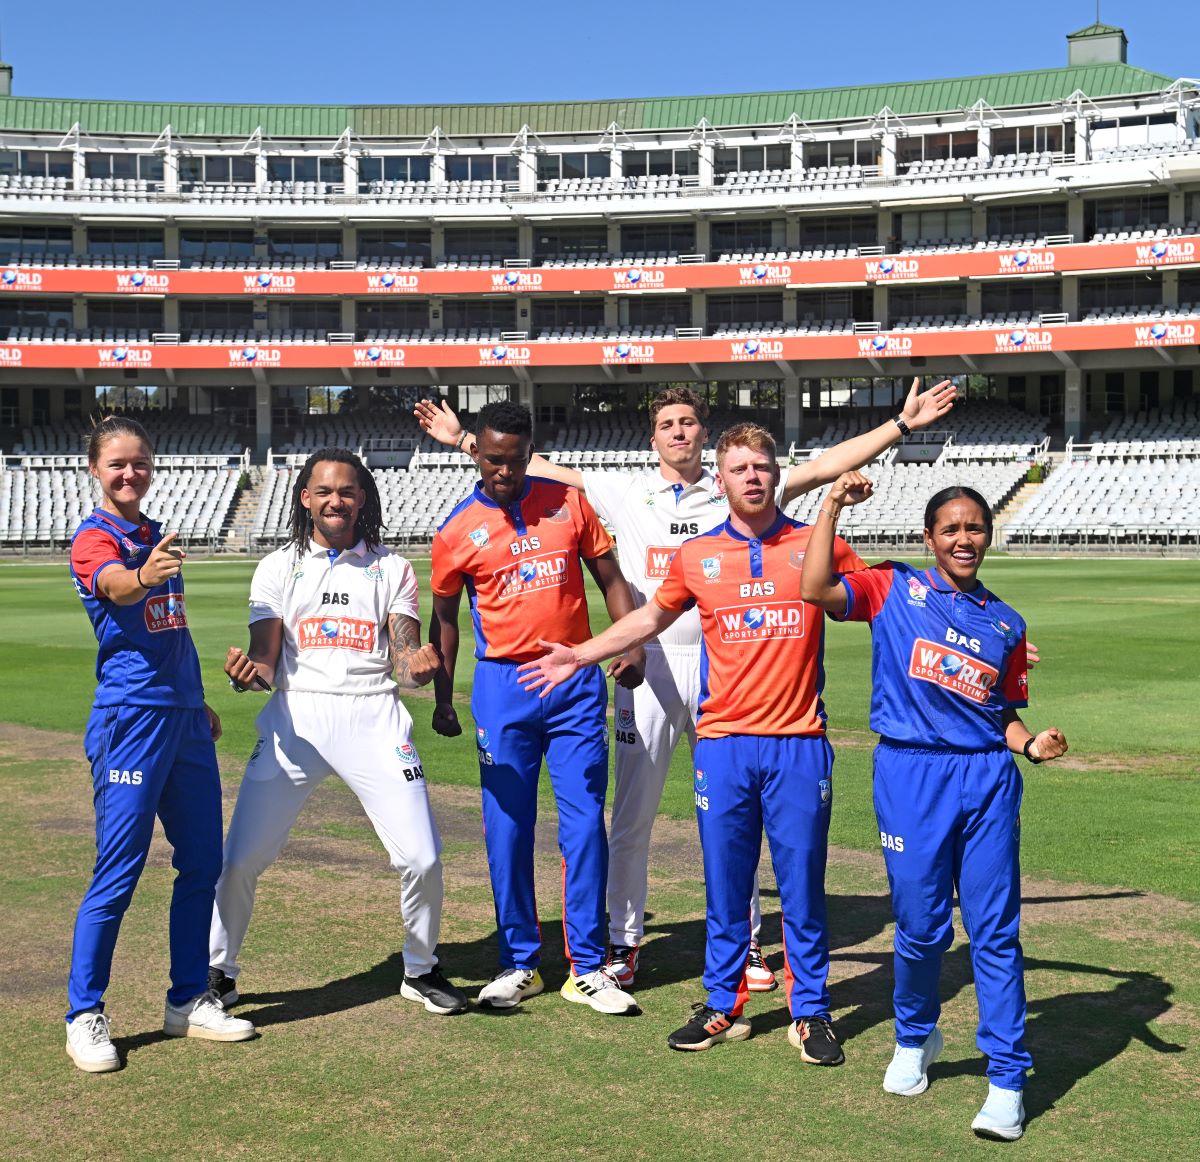 World Sports Betting and Western Cape Cricket Partner up for an exciting new era: ow.ly/6CfL50QG0kZ #WorldSportsBetting #WesternProvince #hiekomnding